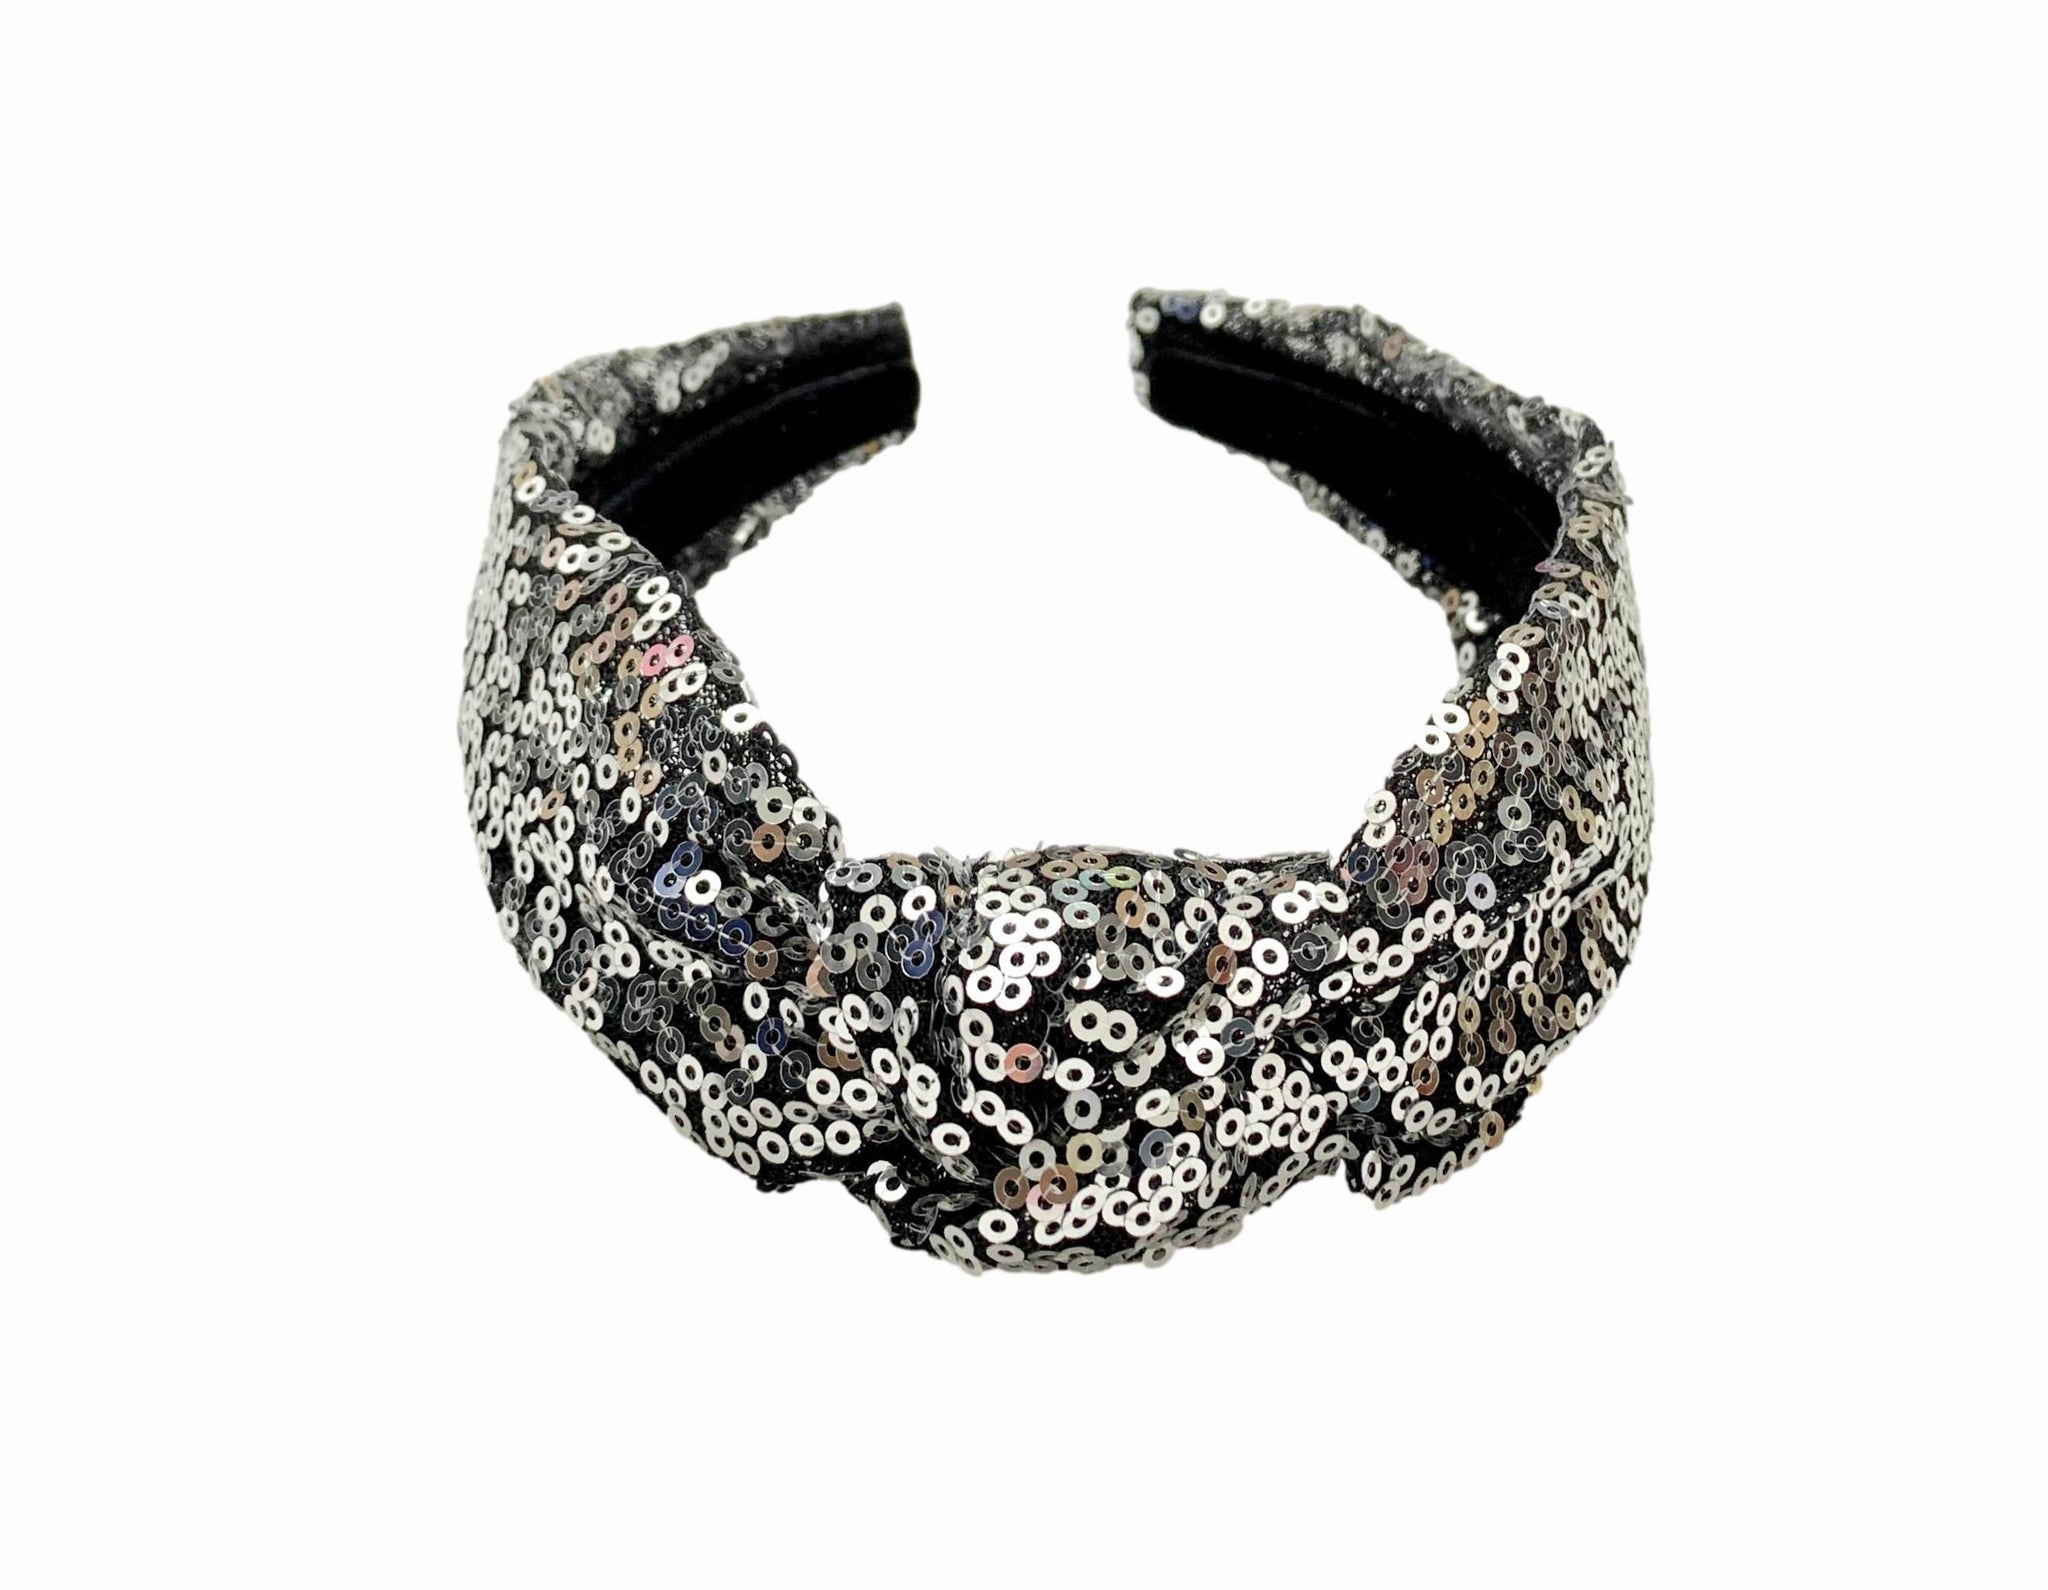 TOP KNOT HEADBAND-SEQUIN SILVER and BLACK New Year's Sparkle